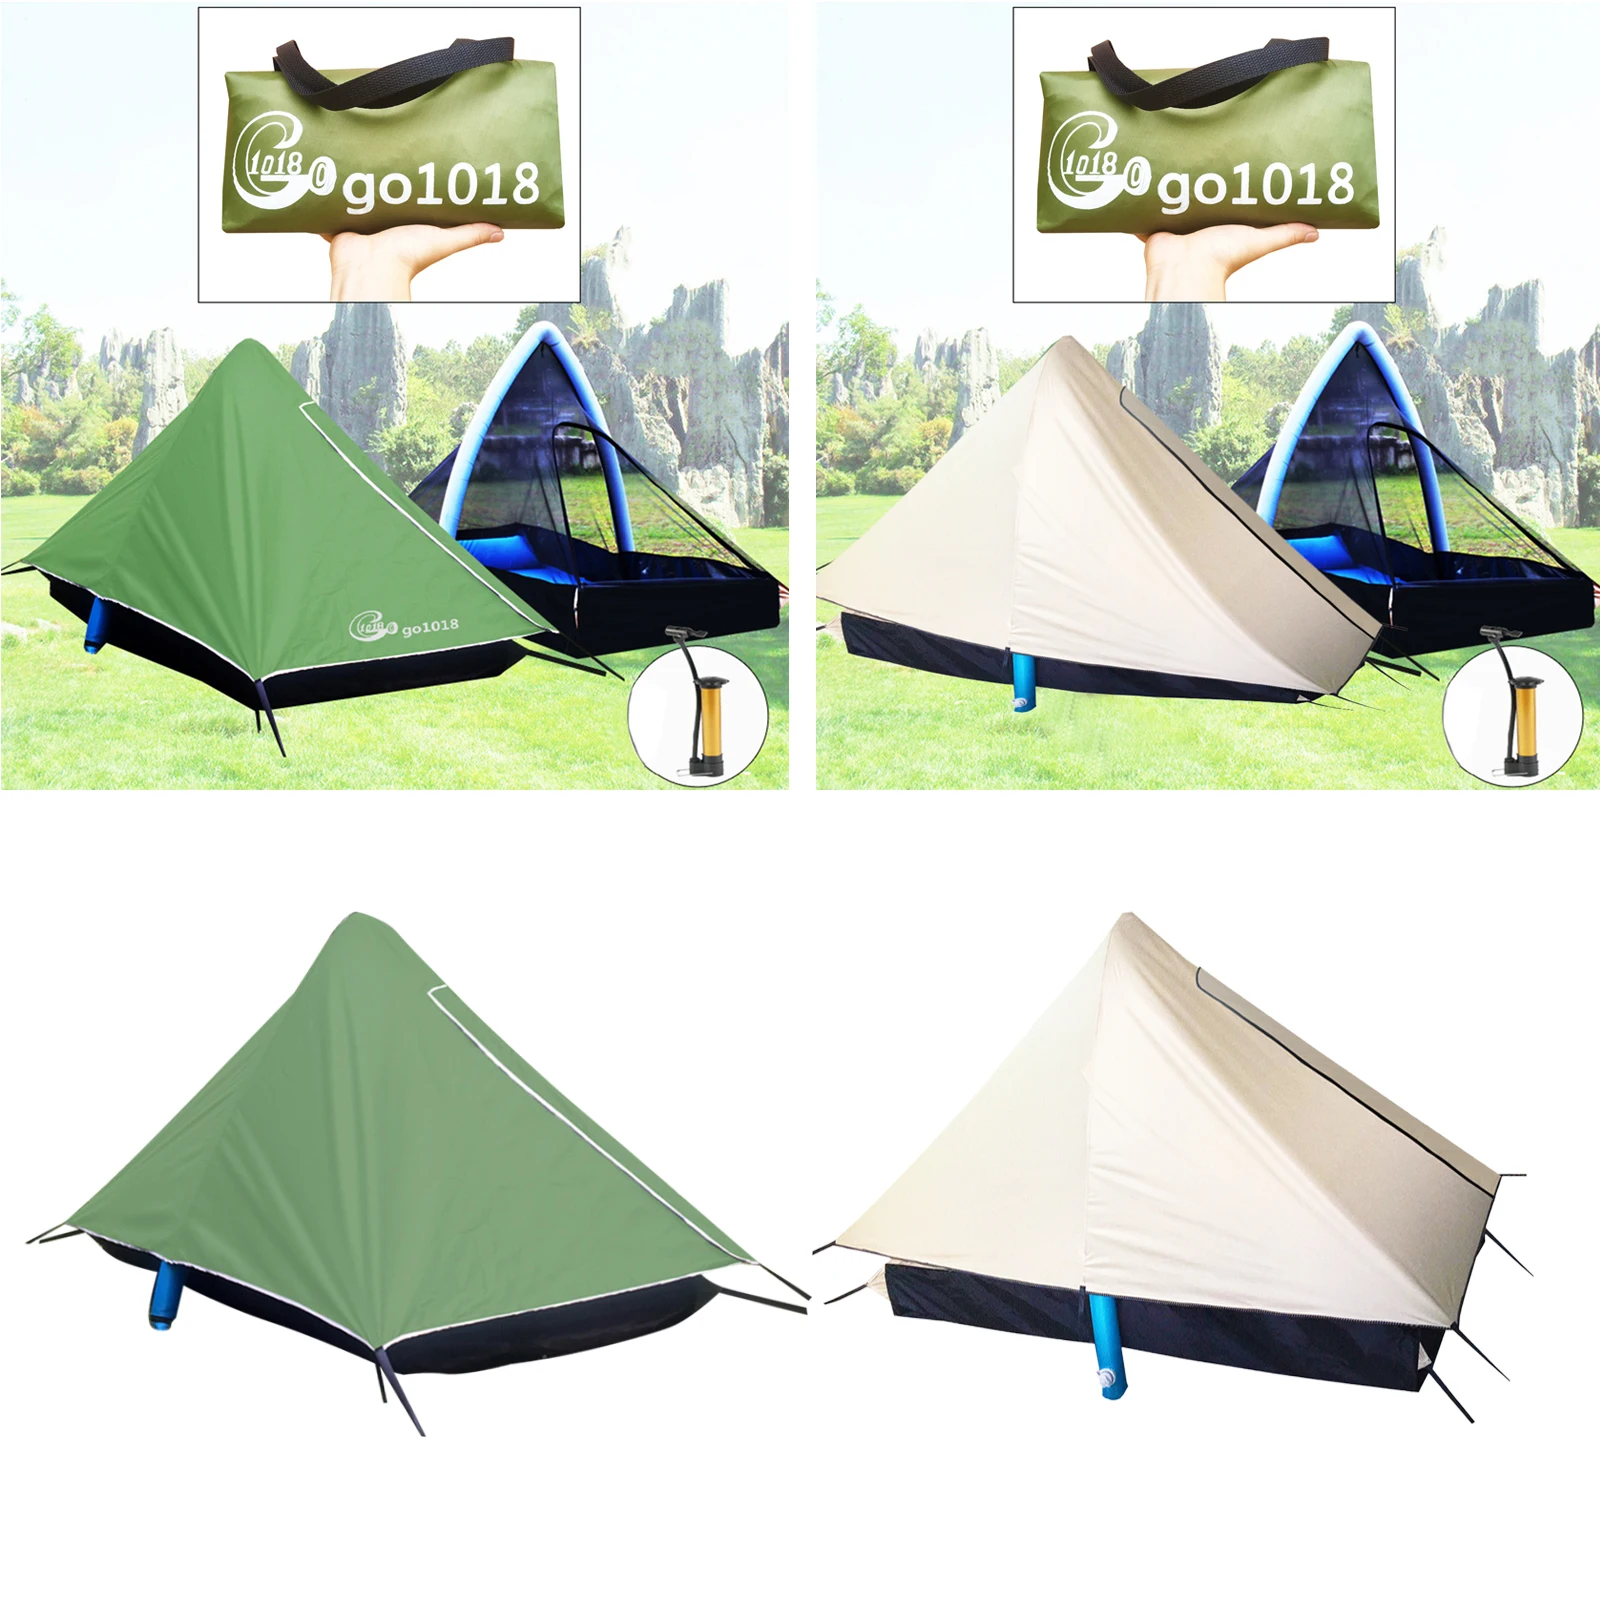 Portable Single Tents Camping Tent Travel Hiking Weather Pod for Adults Kids